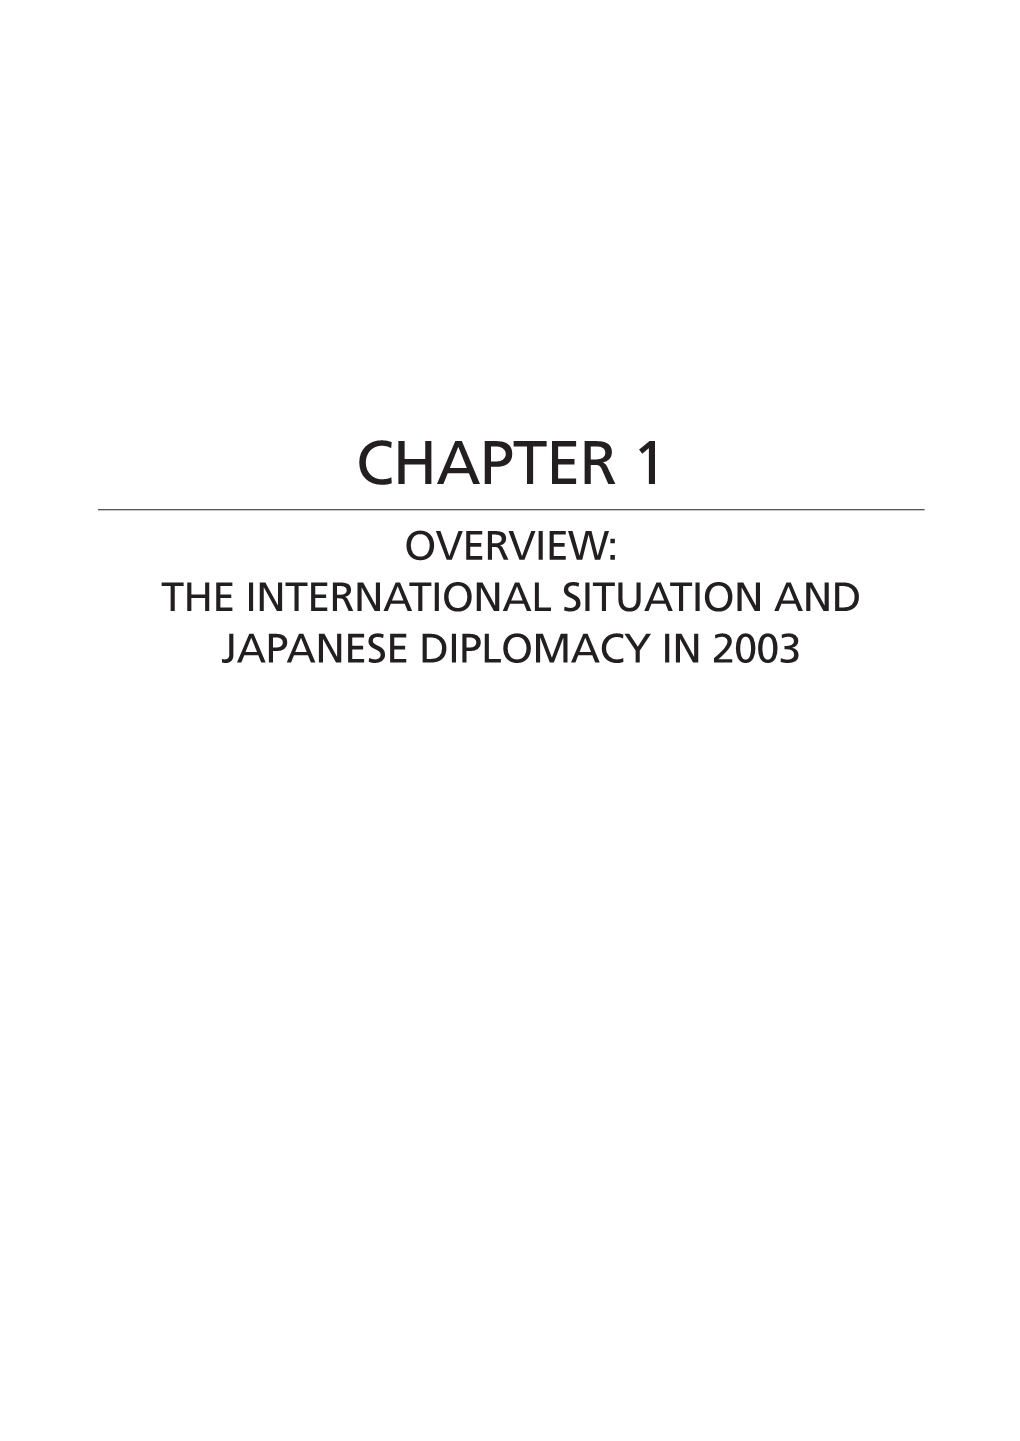 Chapter 1. Overview: the International Situation and Japanese Diplomacy